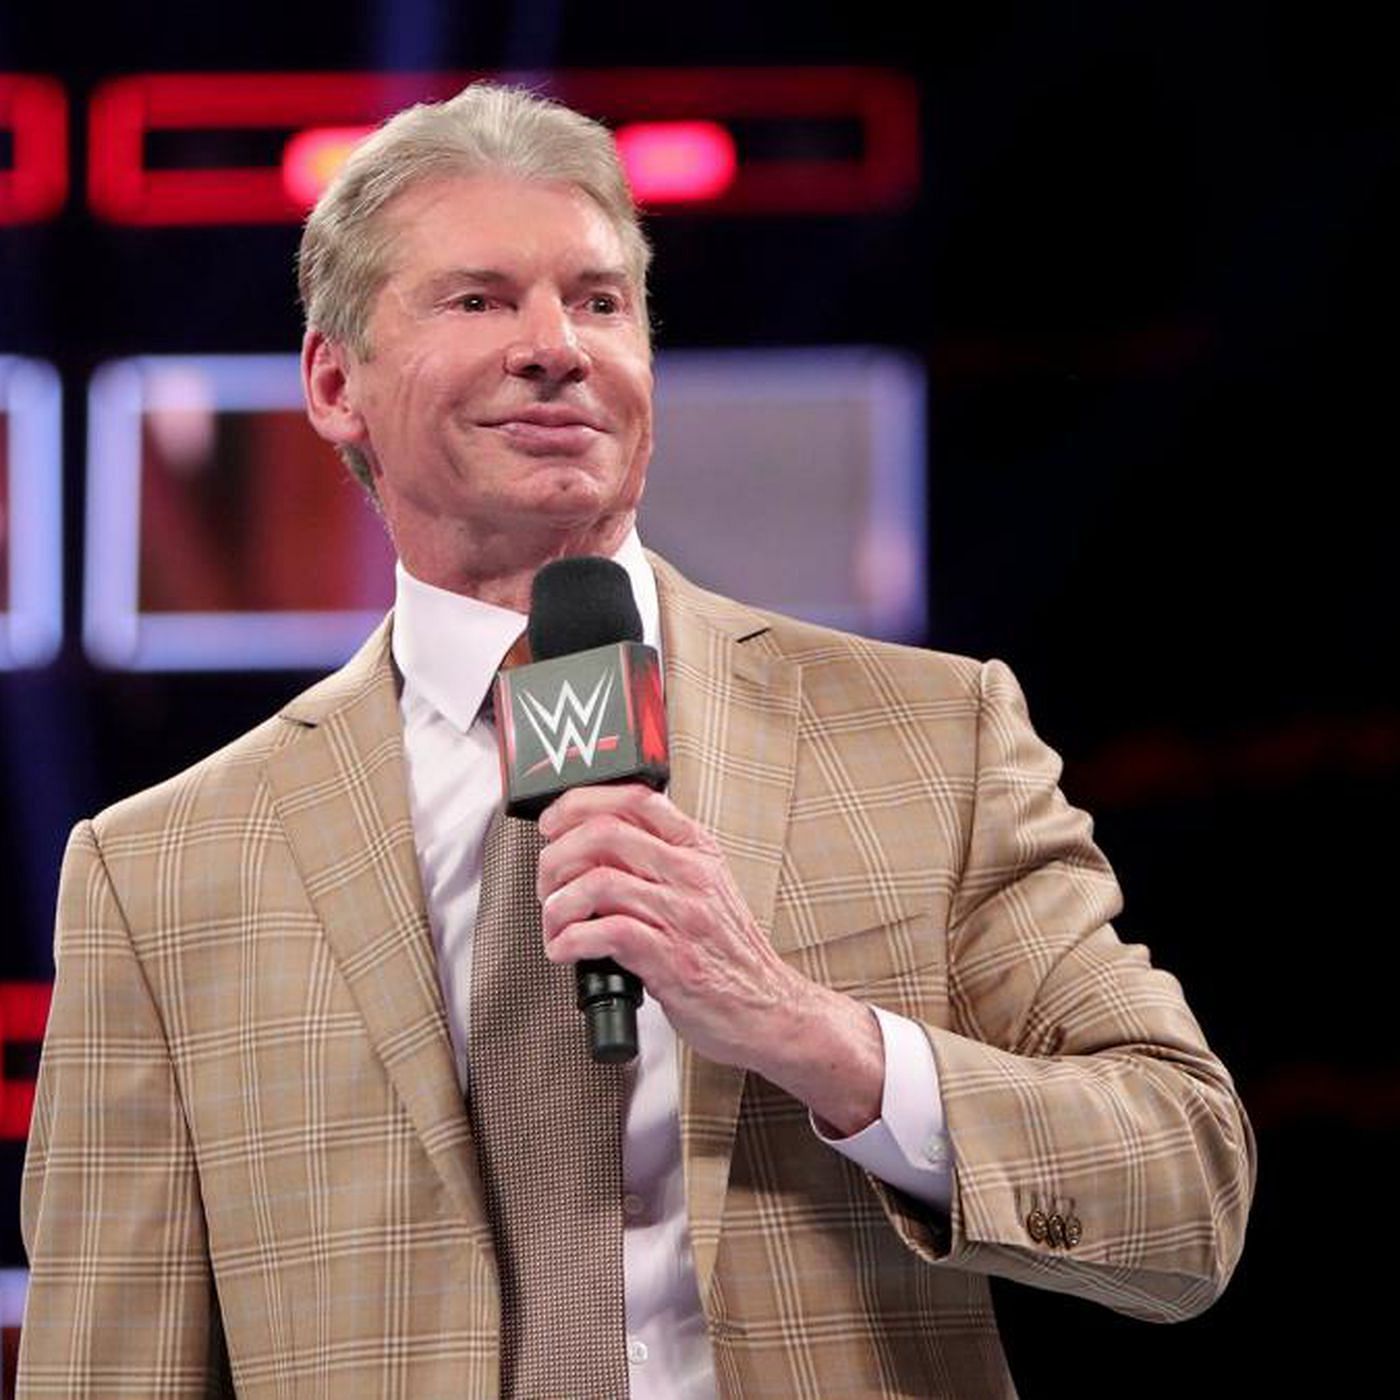 Vince McMahon stepped away from the company he globalized earlier this summer